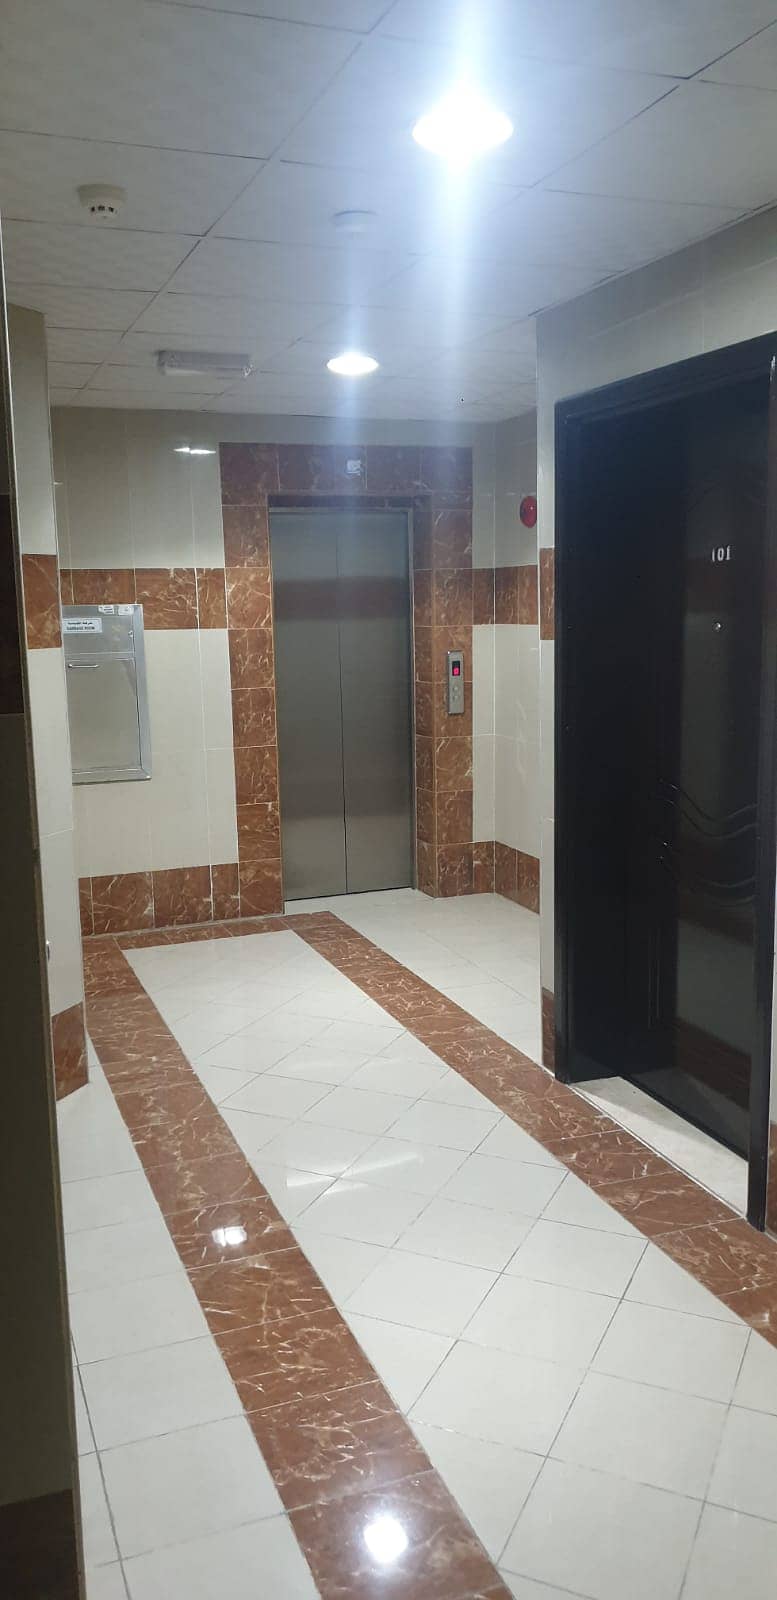 For sale in Sharjah, Al Buteena, a commercial residential building